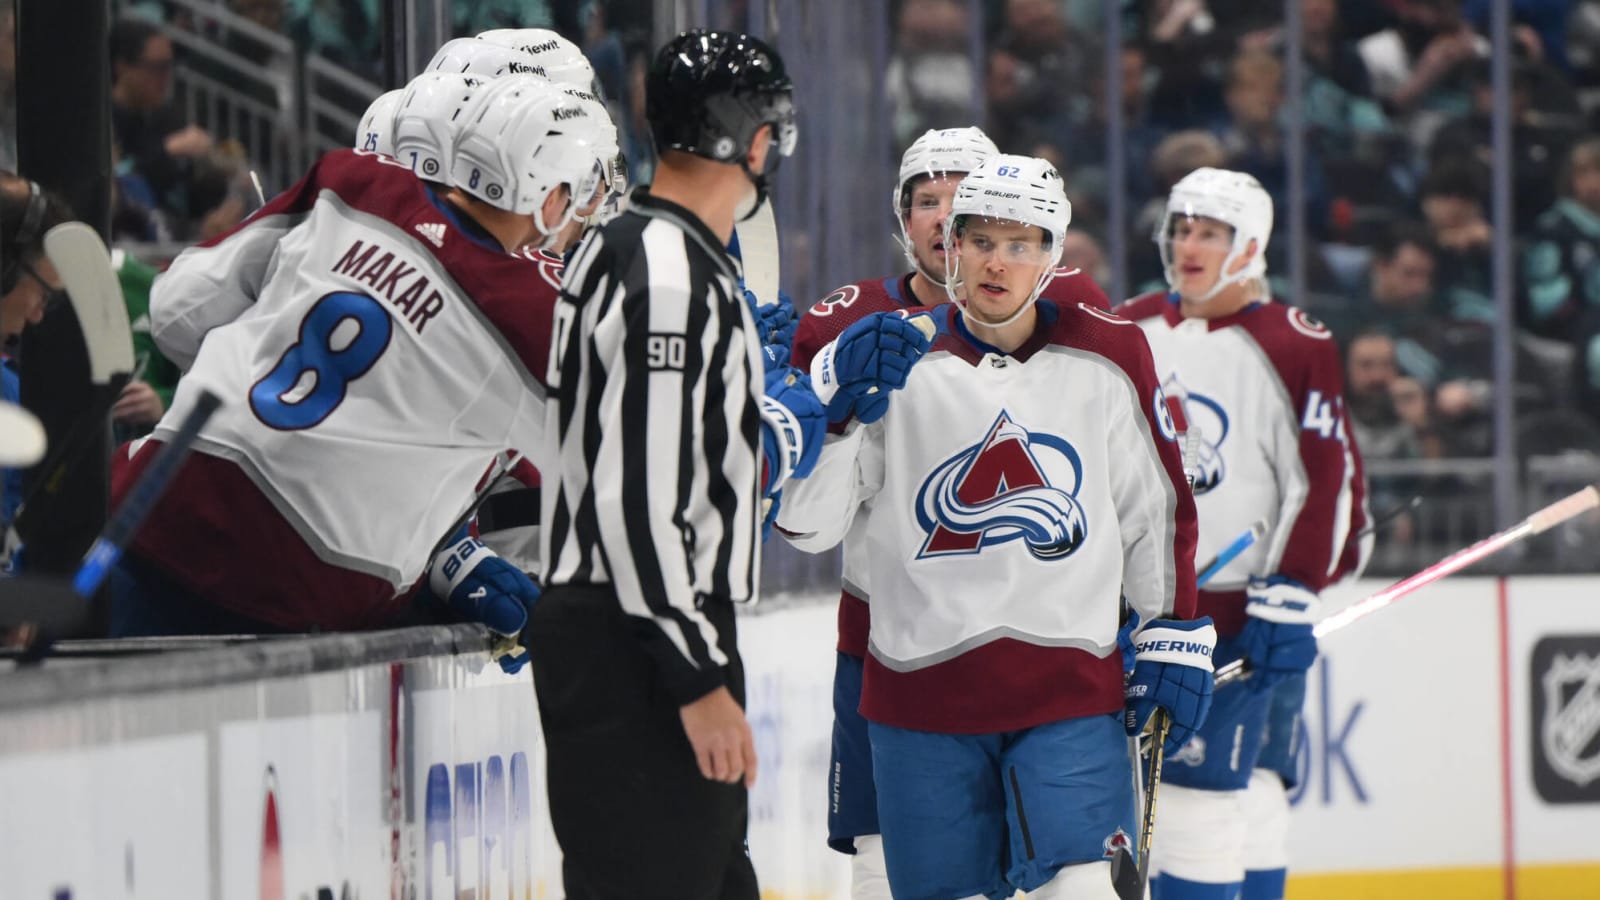 Cale Makar scores twice in Avalanche 4-1 win over Hurricanes